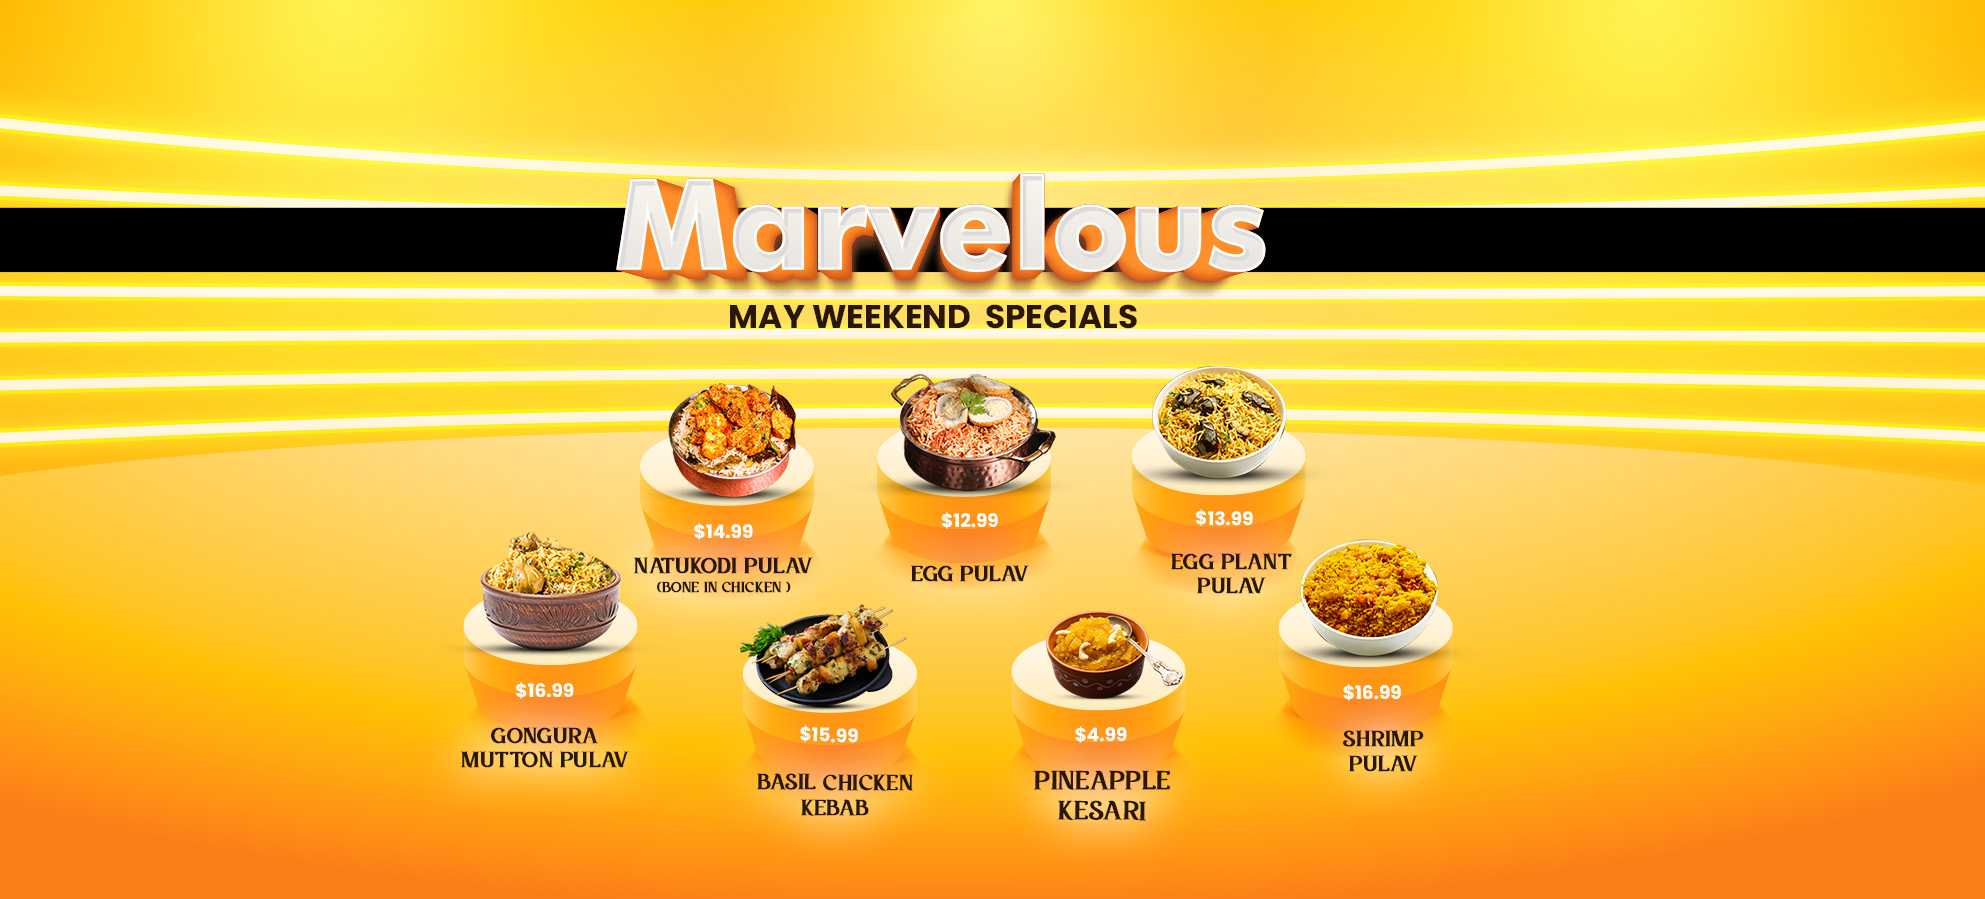 Marvelous May Weekend Specials